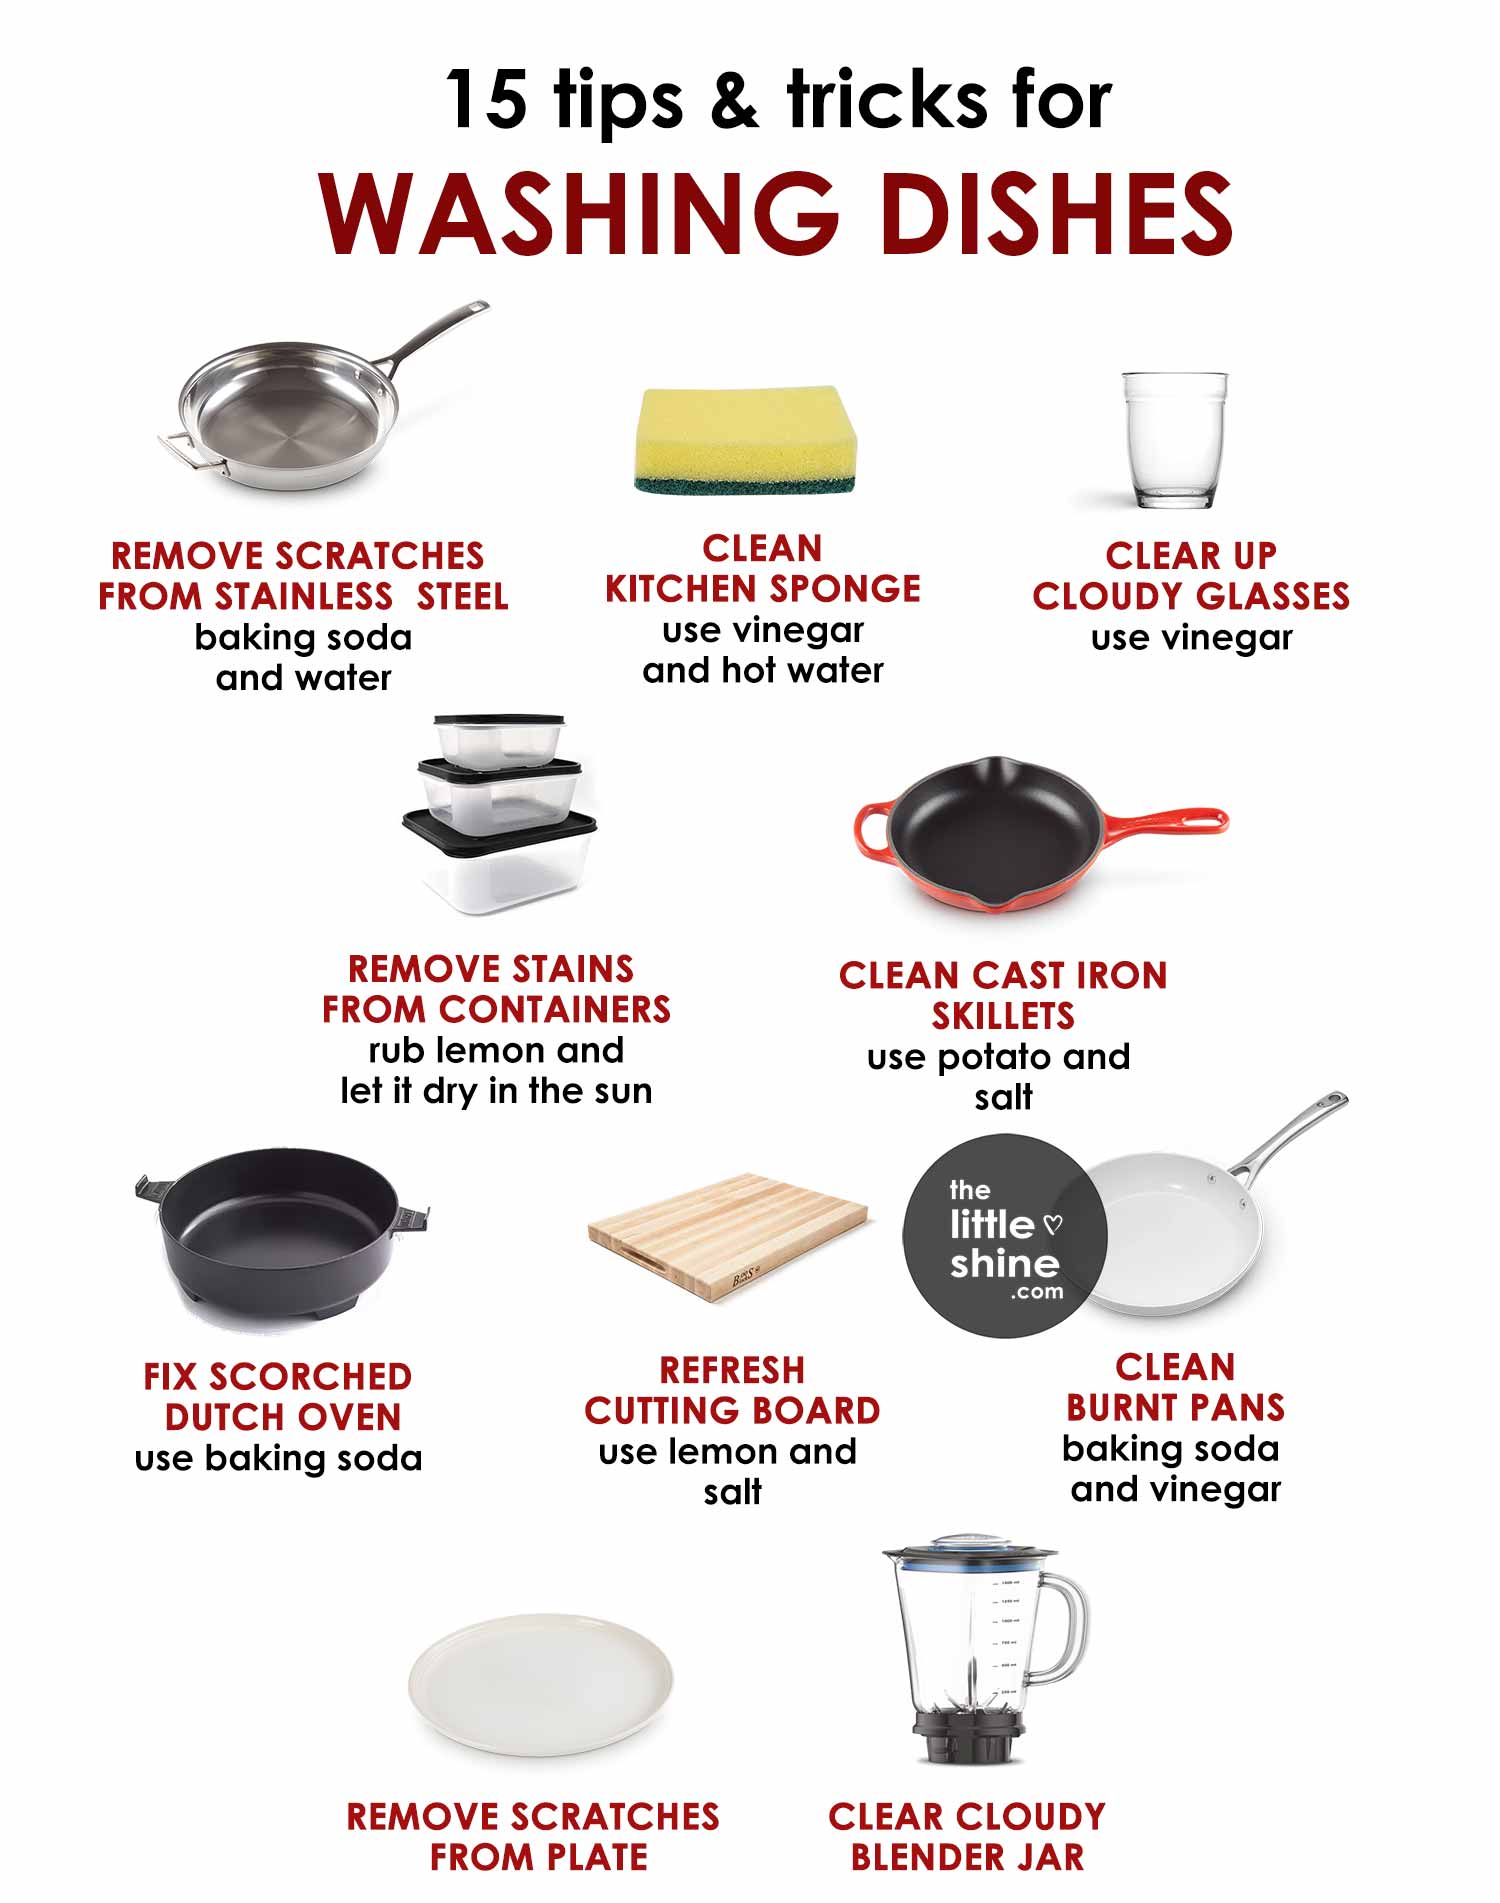 15 Tips for Washing Dishes